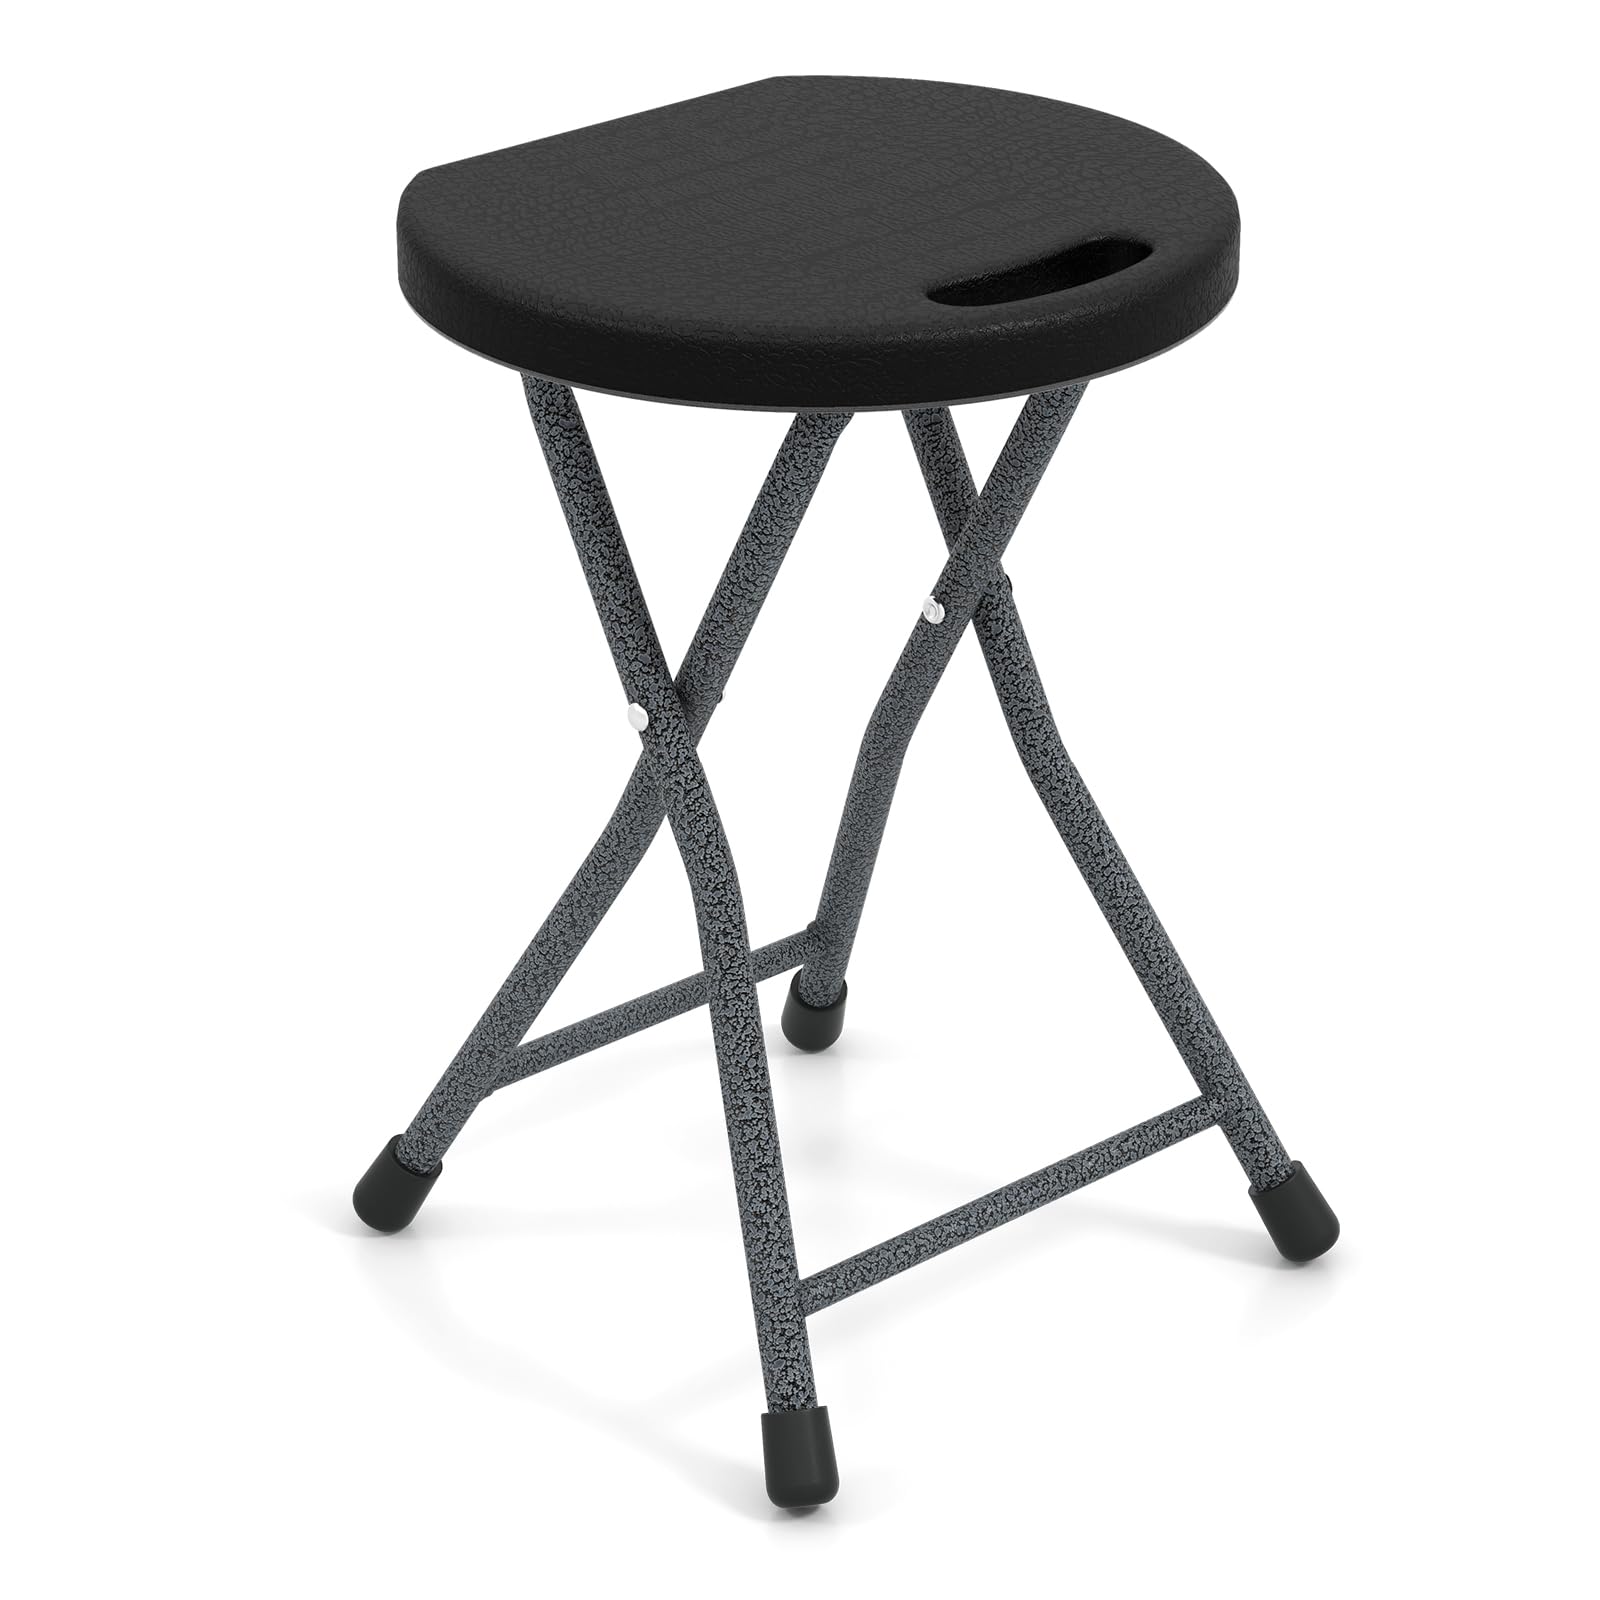 Giantex Folding Stool, 18” Height Foldable Bar Stools, Portable Folding Chairs with Built-in Carry Handle